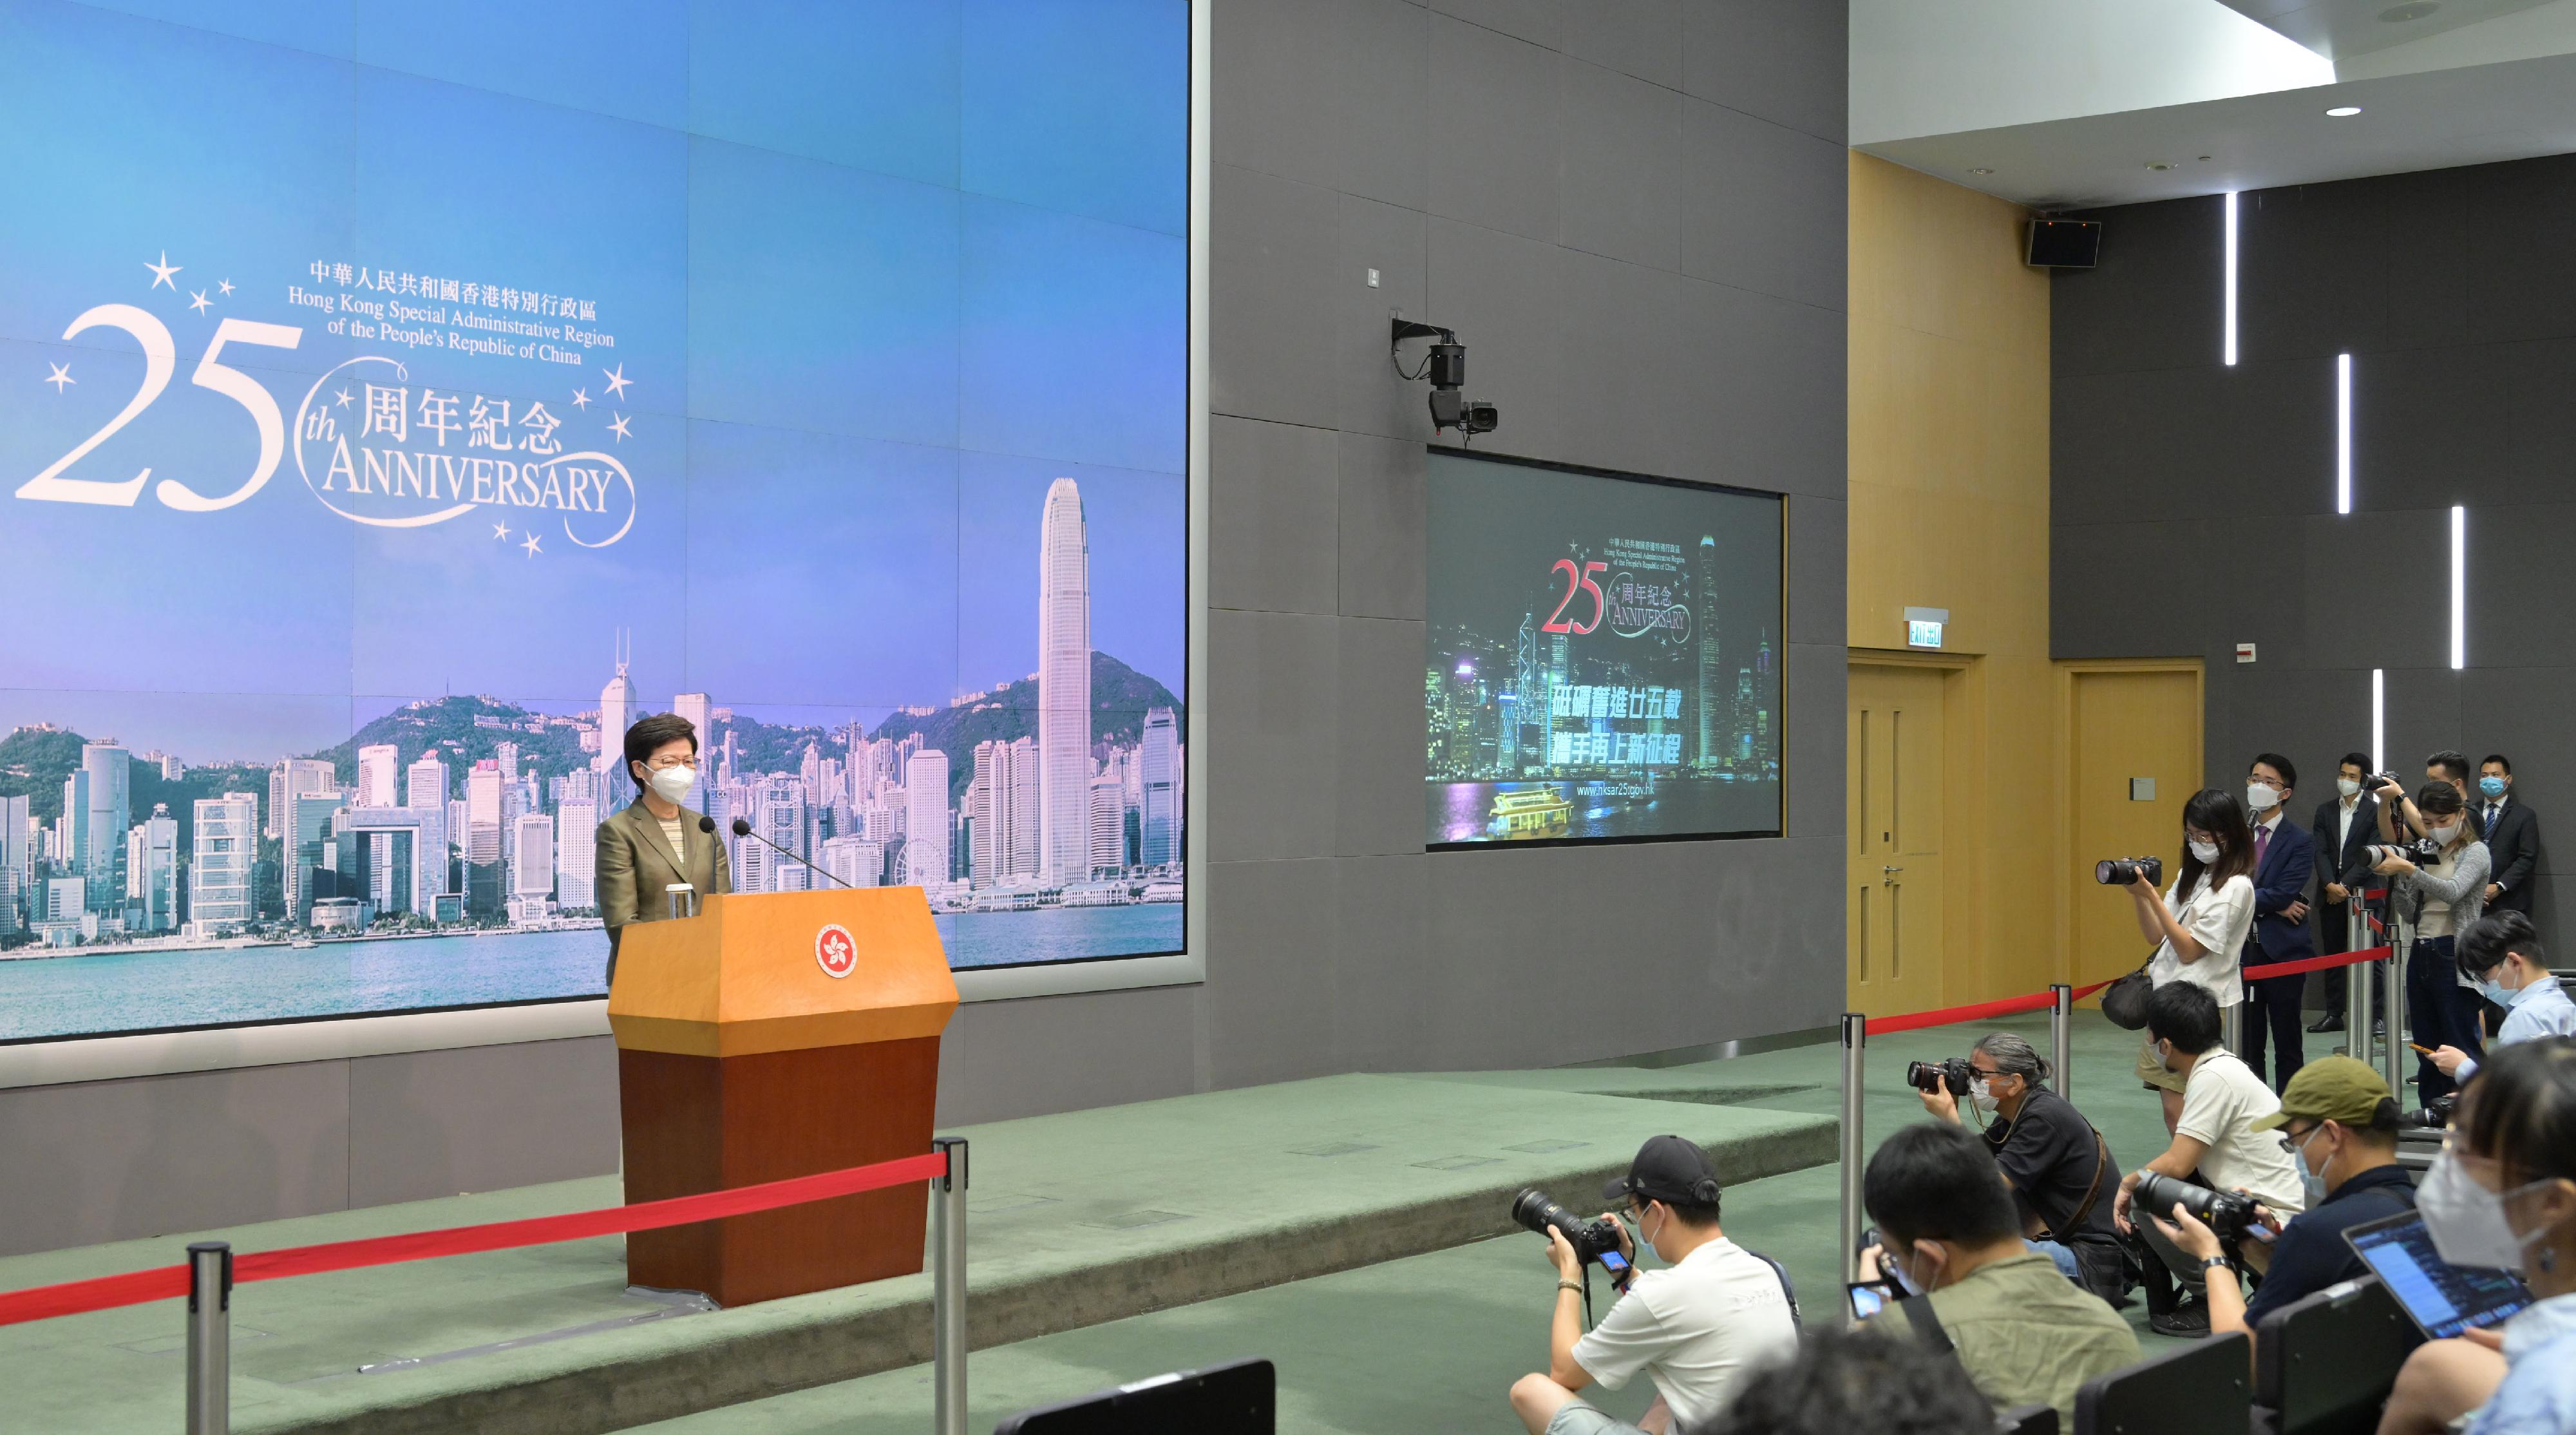 The Chief Executive, Mrs Carrie Lam, introduced the 25th Anniversary theme song “Heading Forward” at a media stand-up before the Executive Council meeting today (May 31), saying that a wide range of activities could be rolled out smoothly.